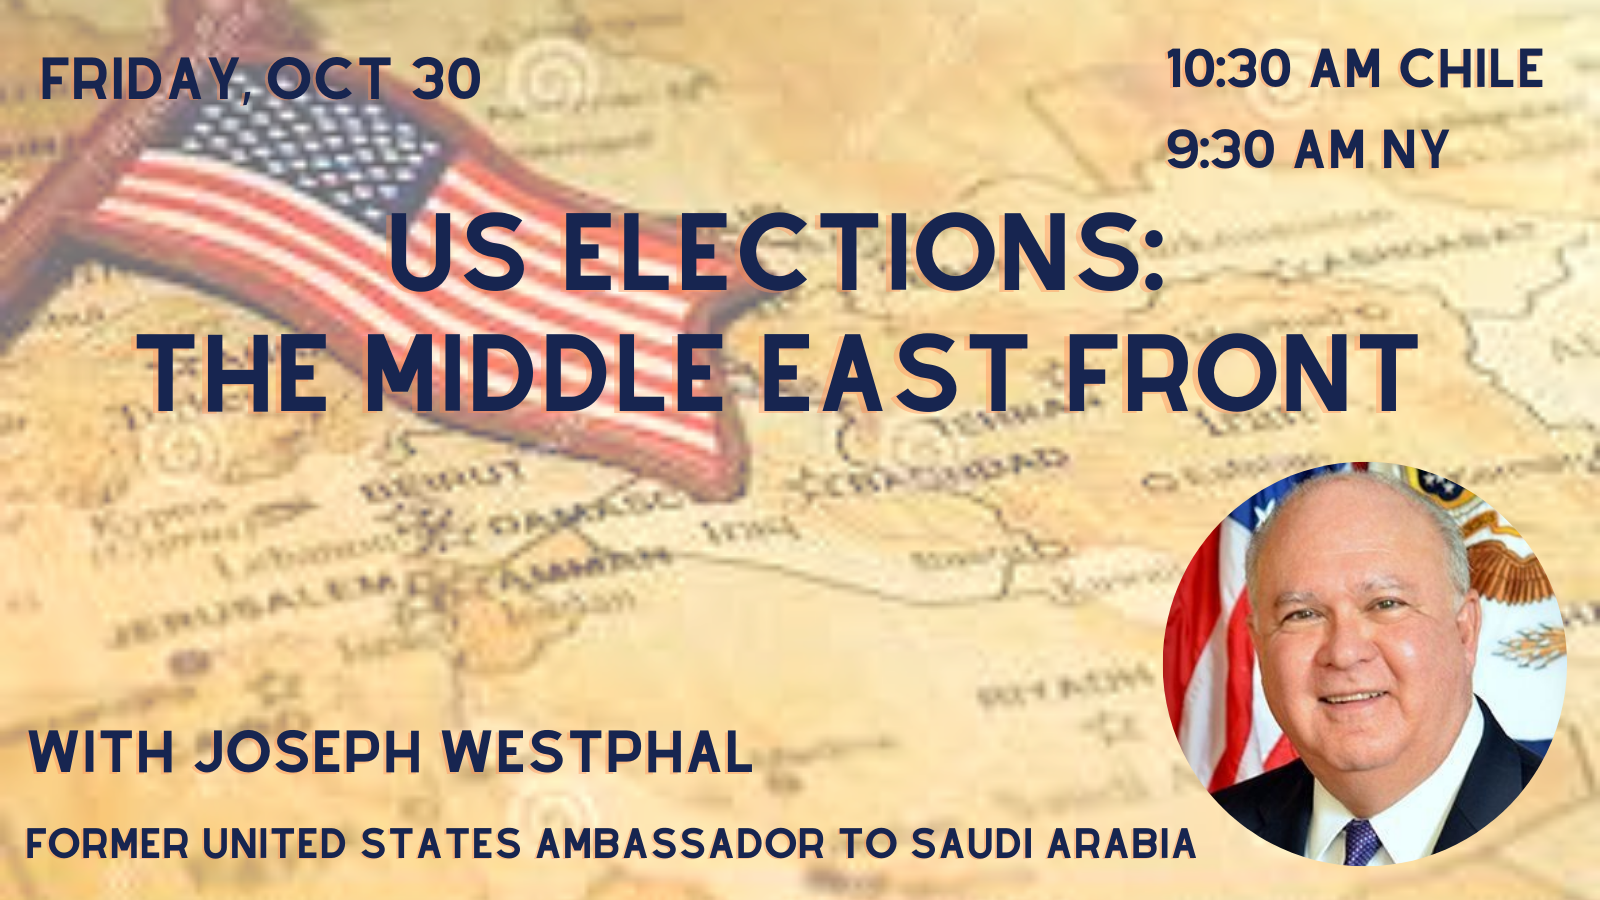 US Elections: The Middle East Front